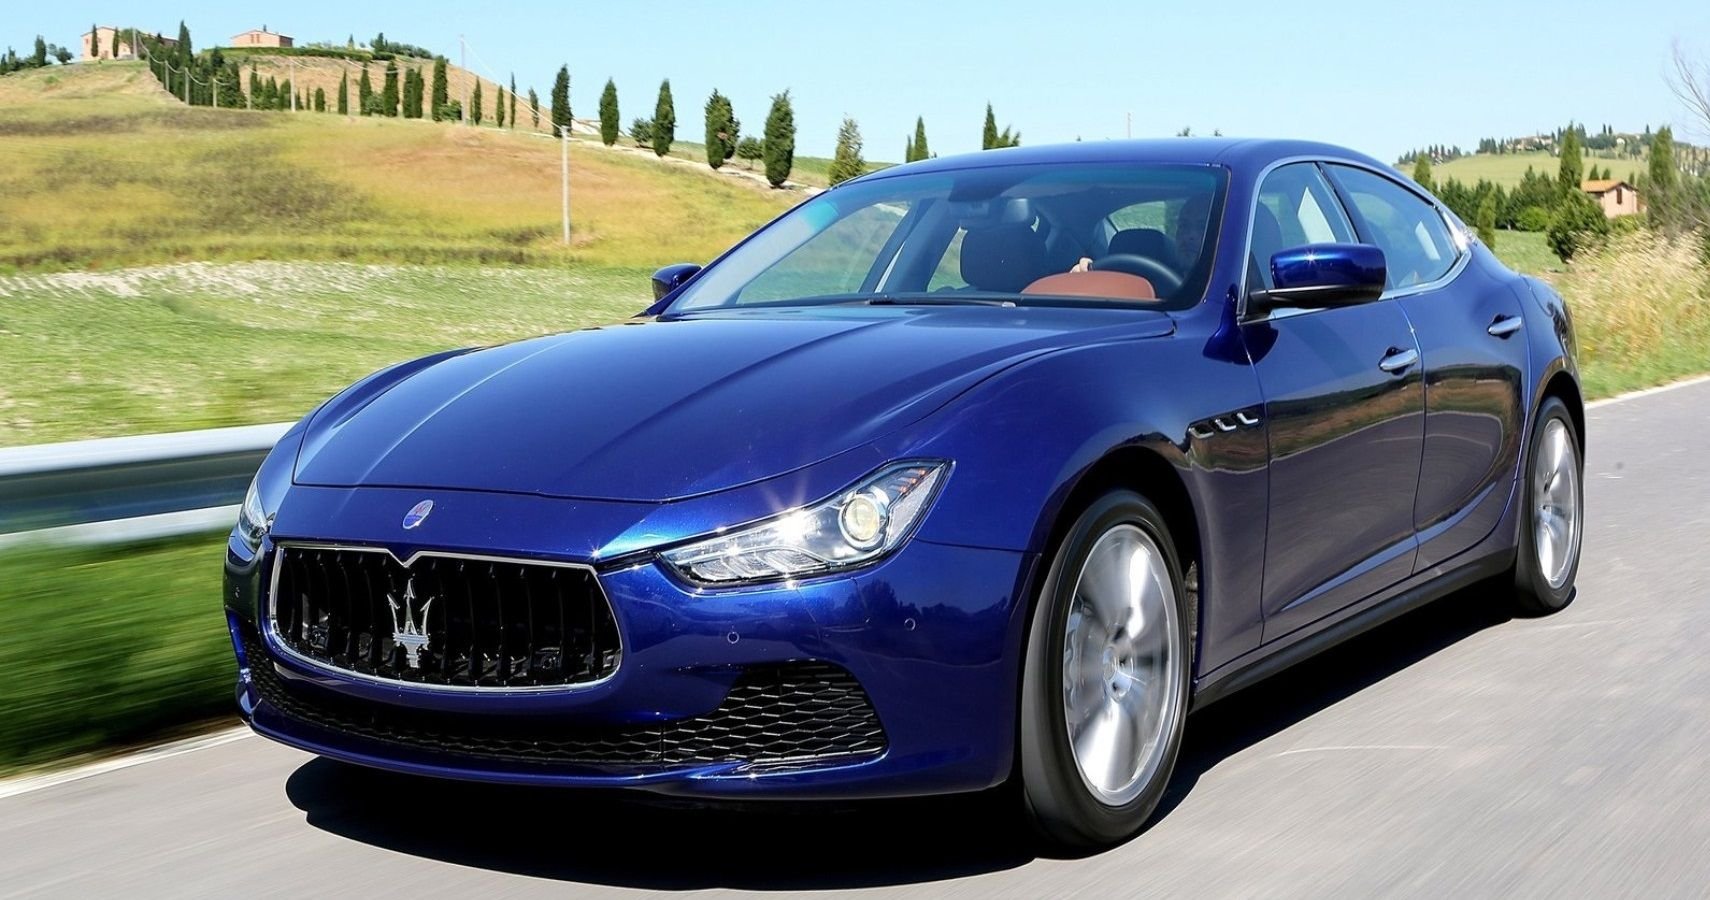 10 Cheap Luxury Cars That Turn Heads Everywhere They Go